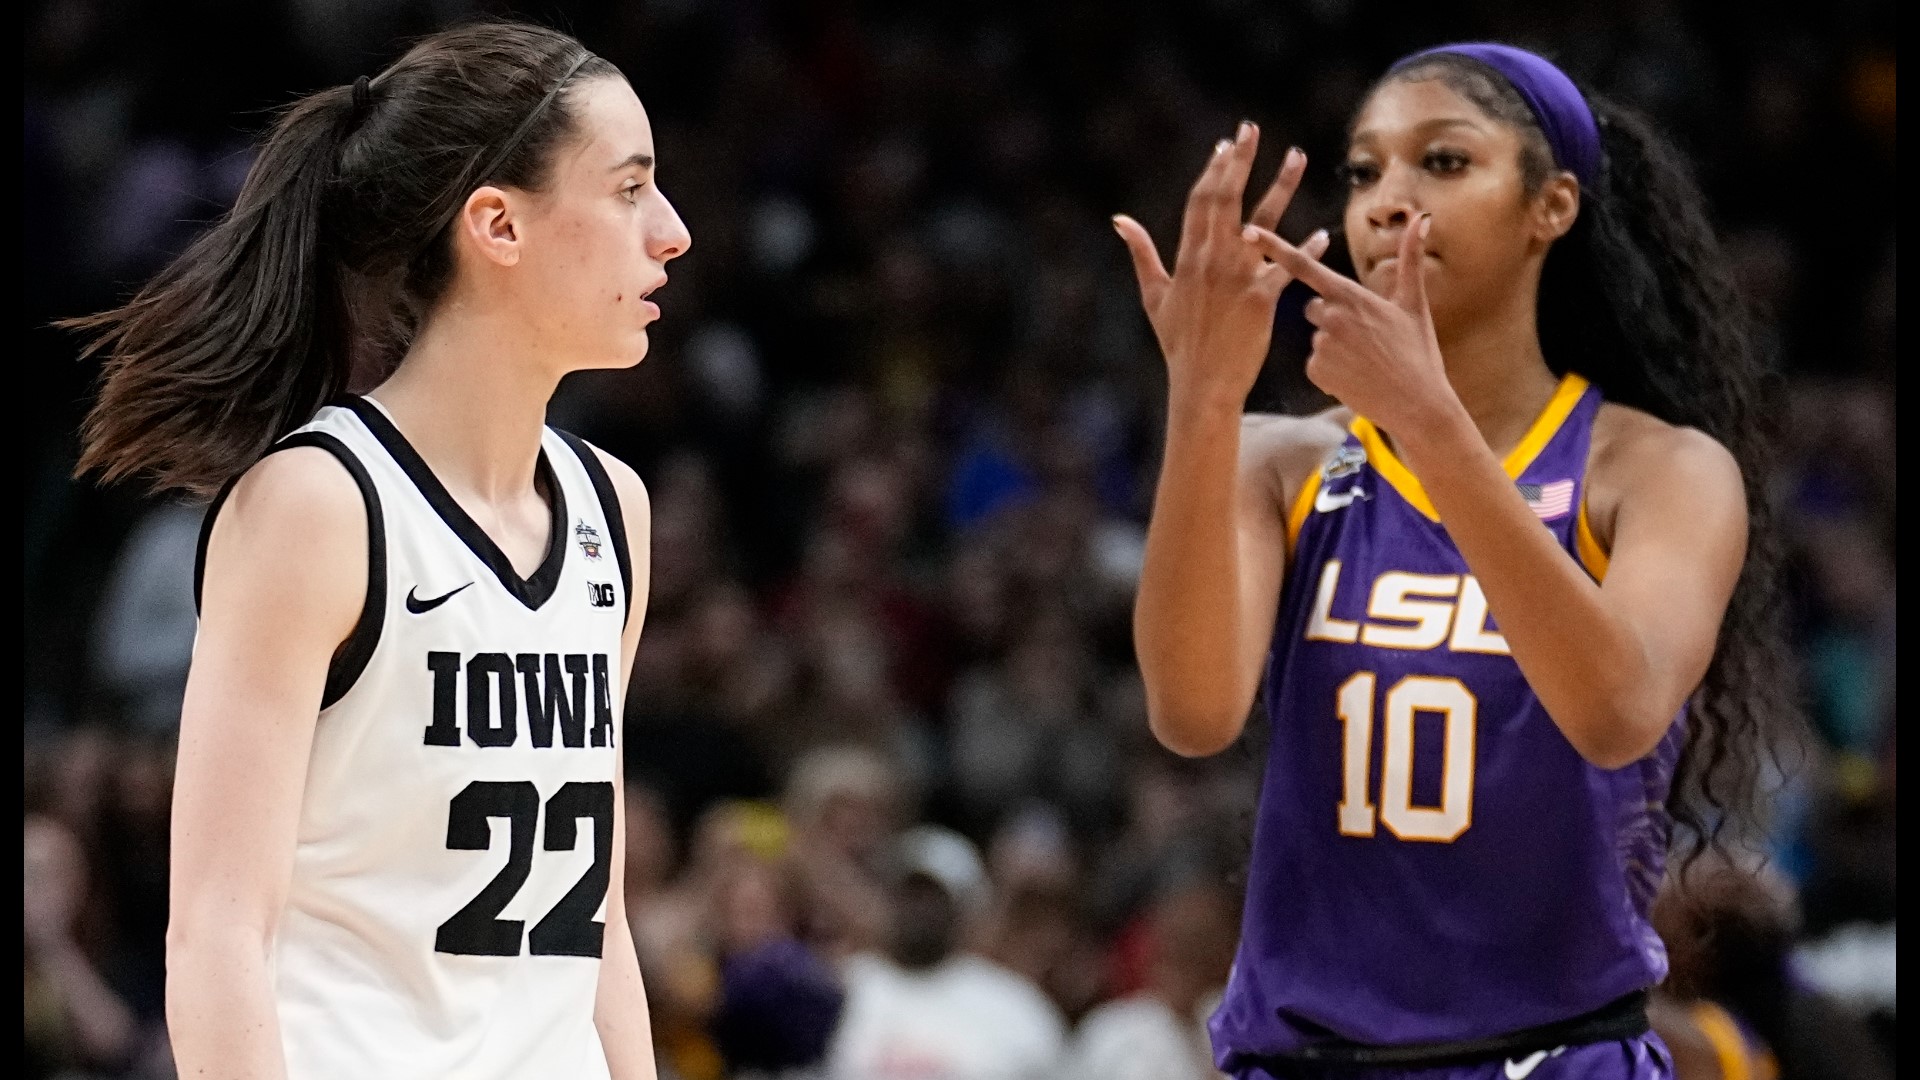 LSU will play in the Elite Eight against Iowa, and a spot in the Final Four is at stake.